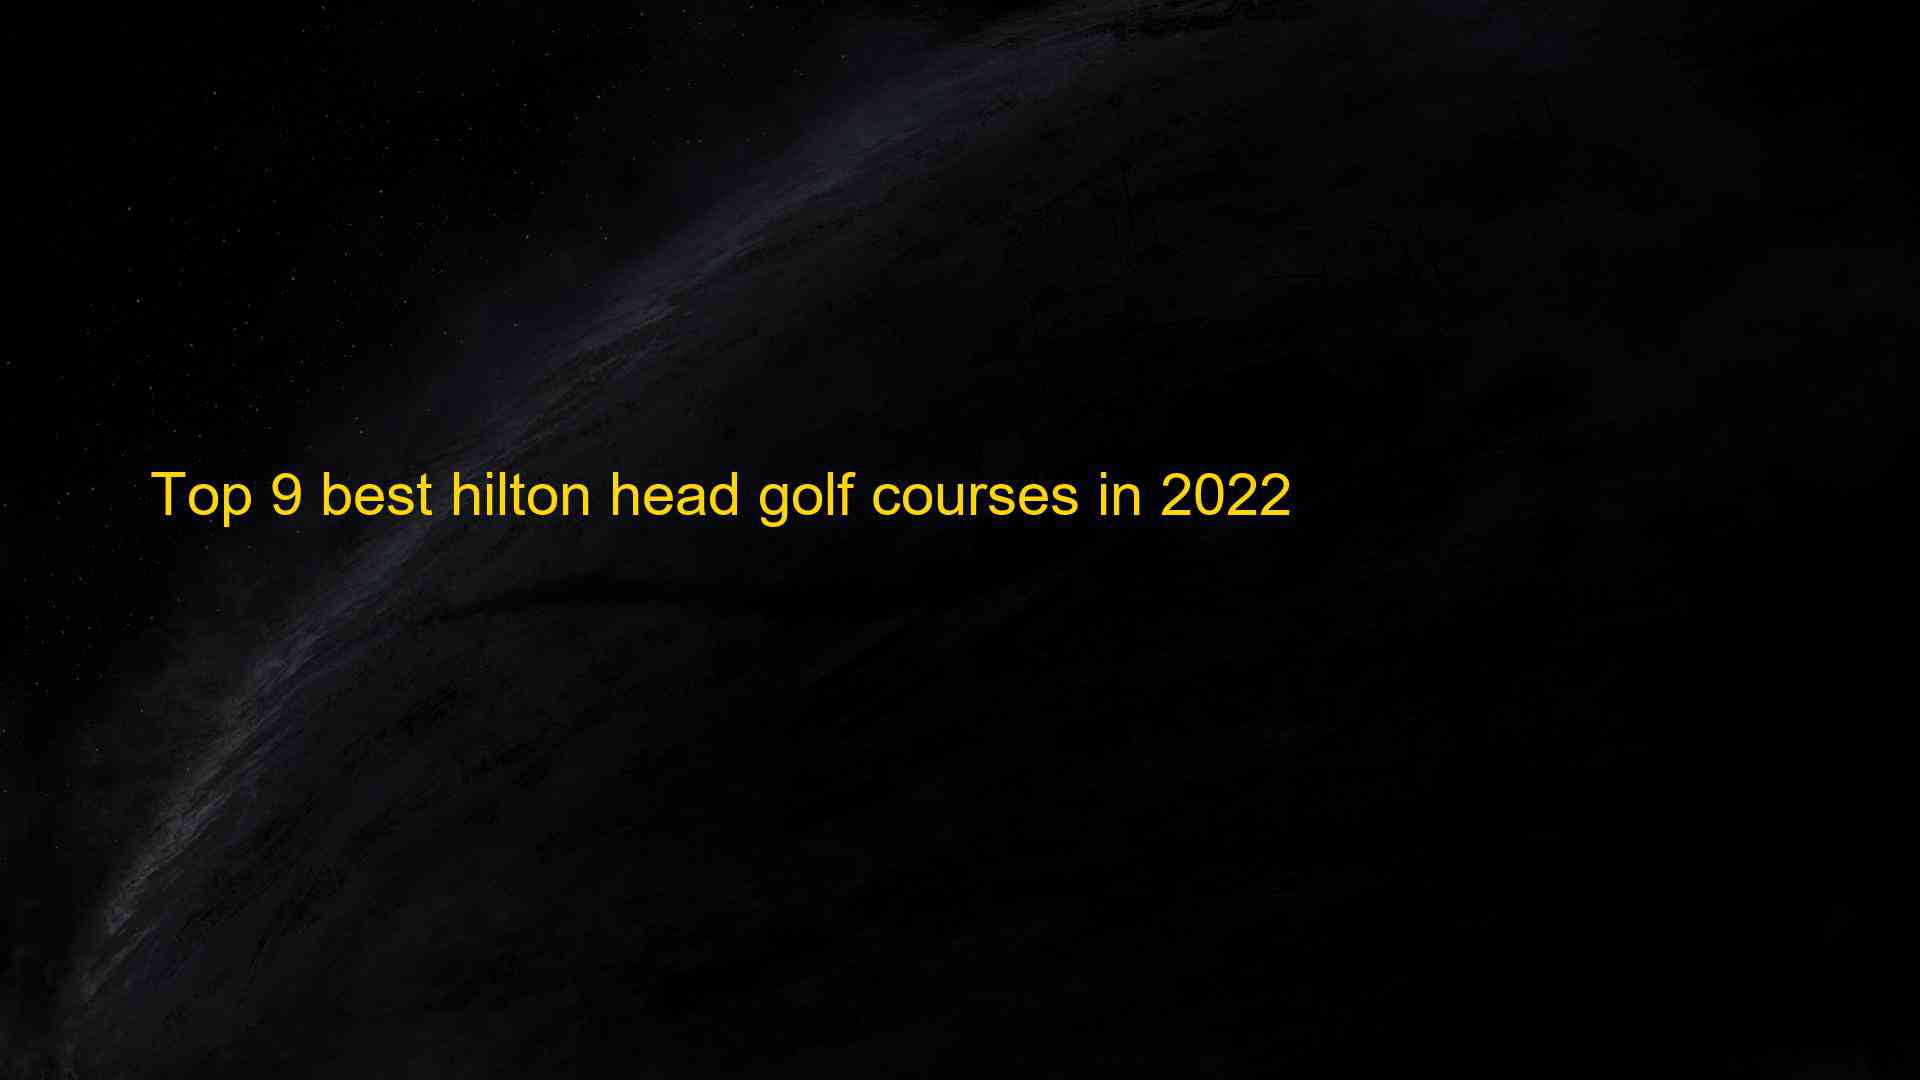 Top 9 best hilton head golf courses in 2022 1661820233